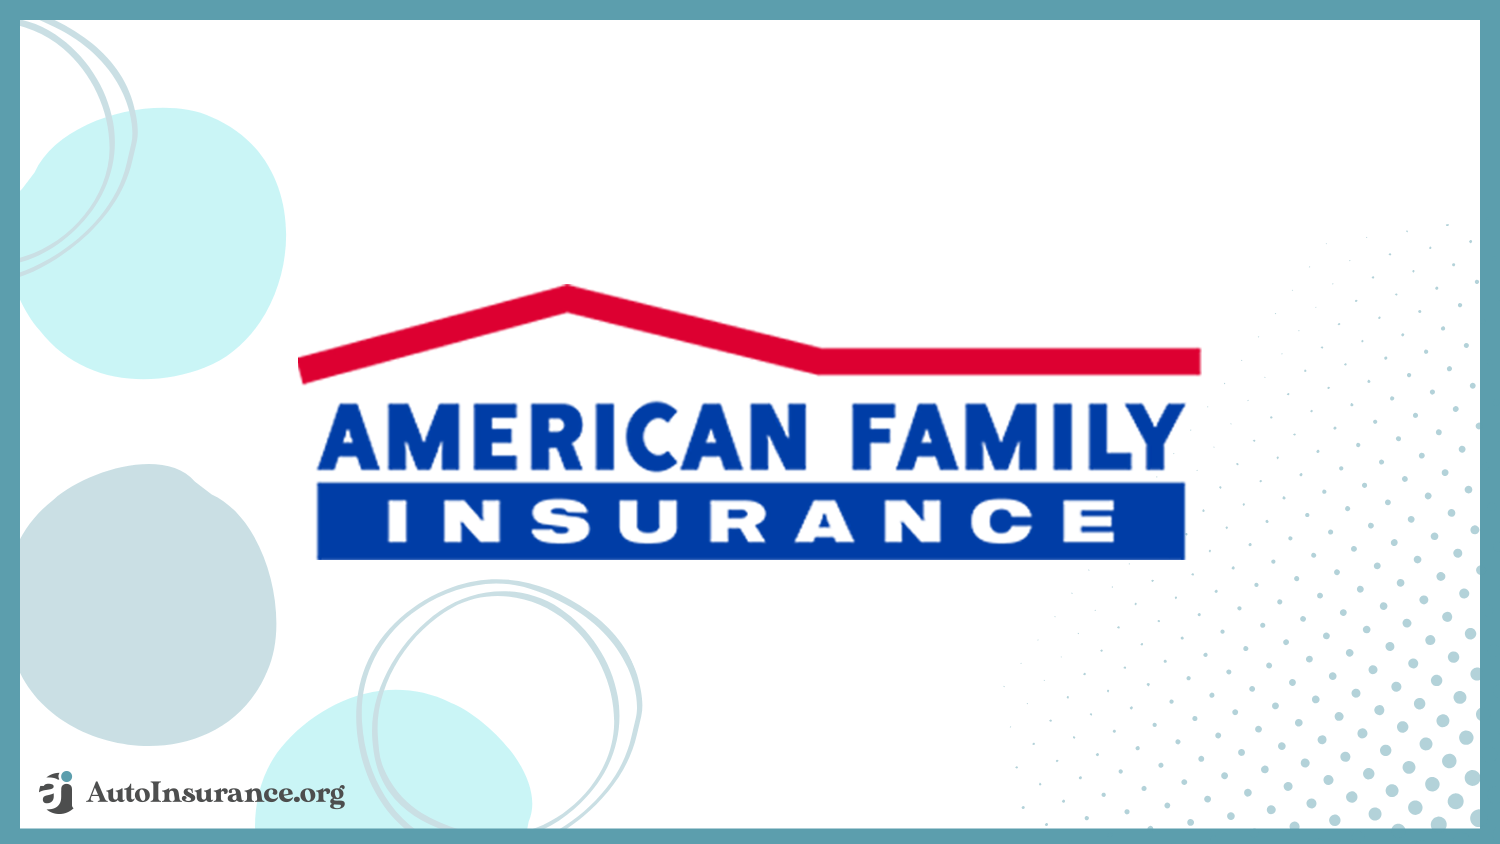 American Family: Best Auto Insurance for Families